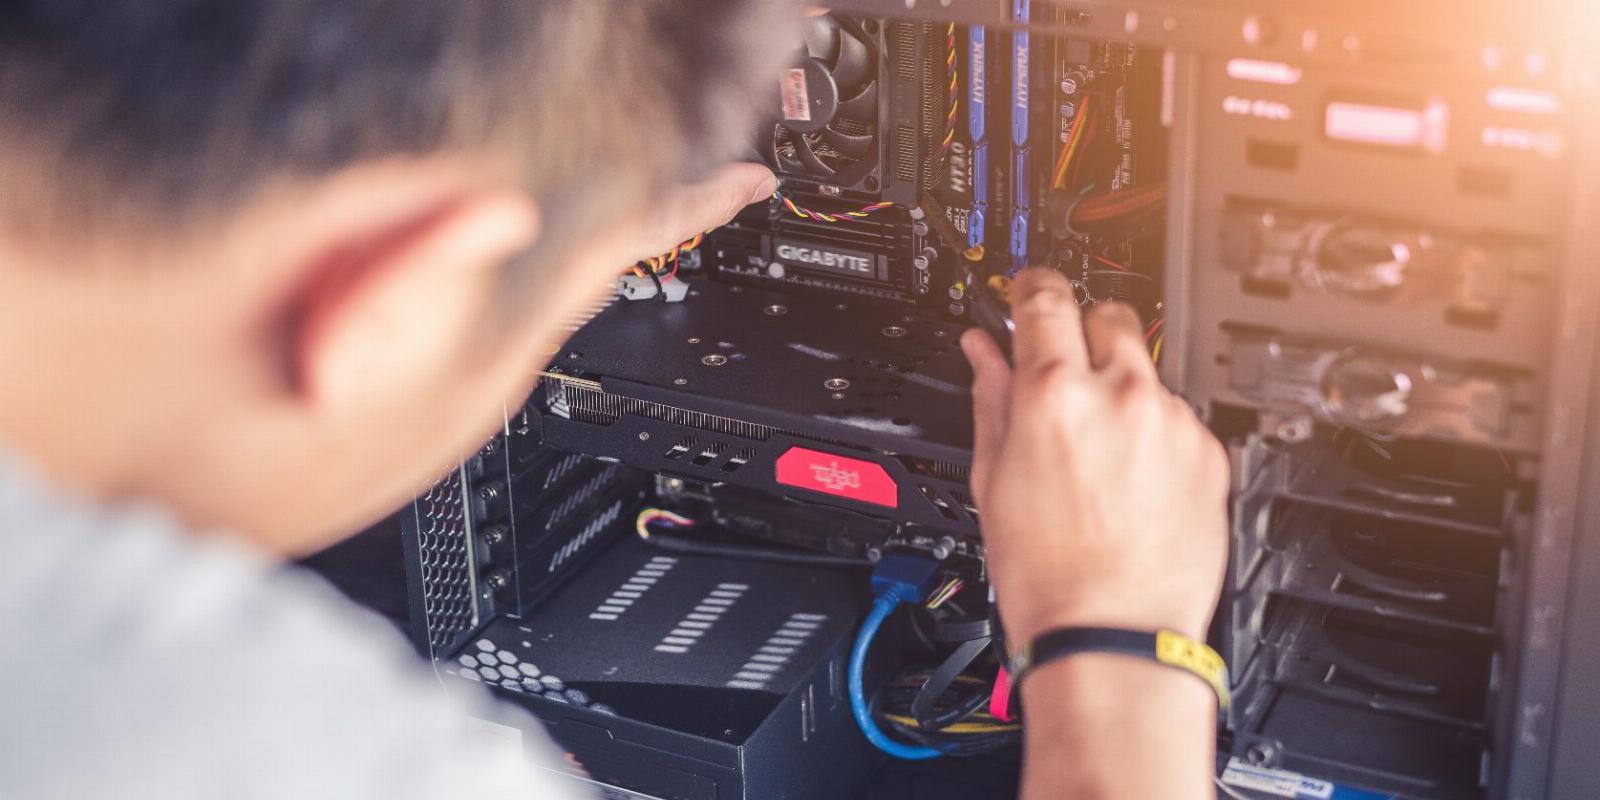 100+ Essential PC Building Terms Defined